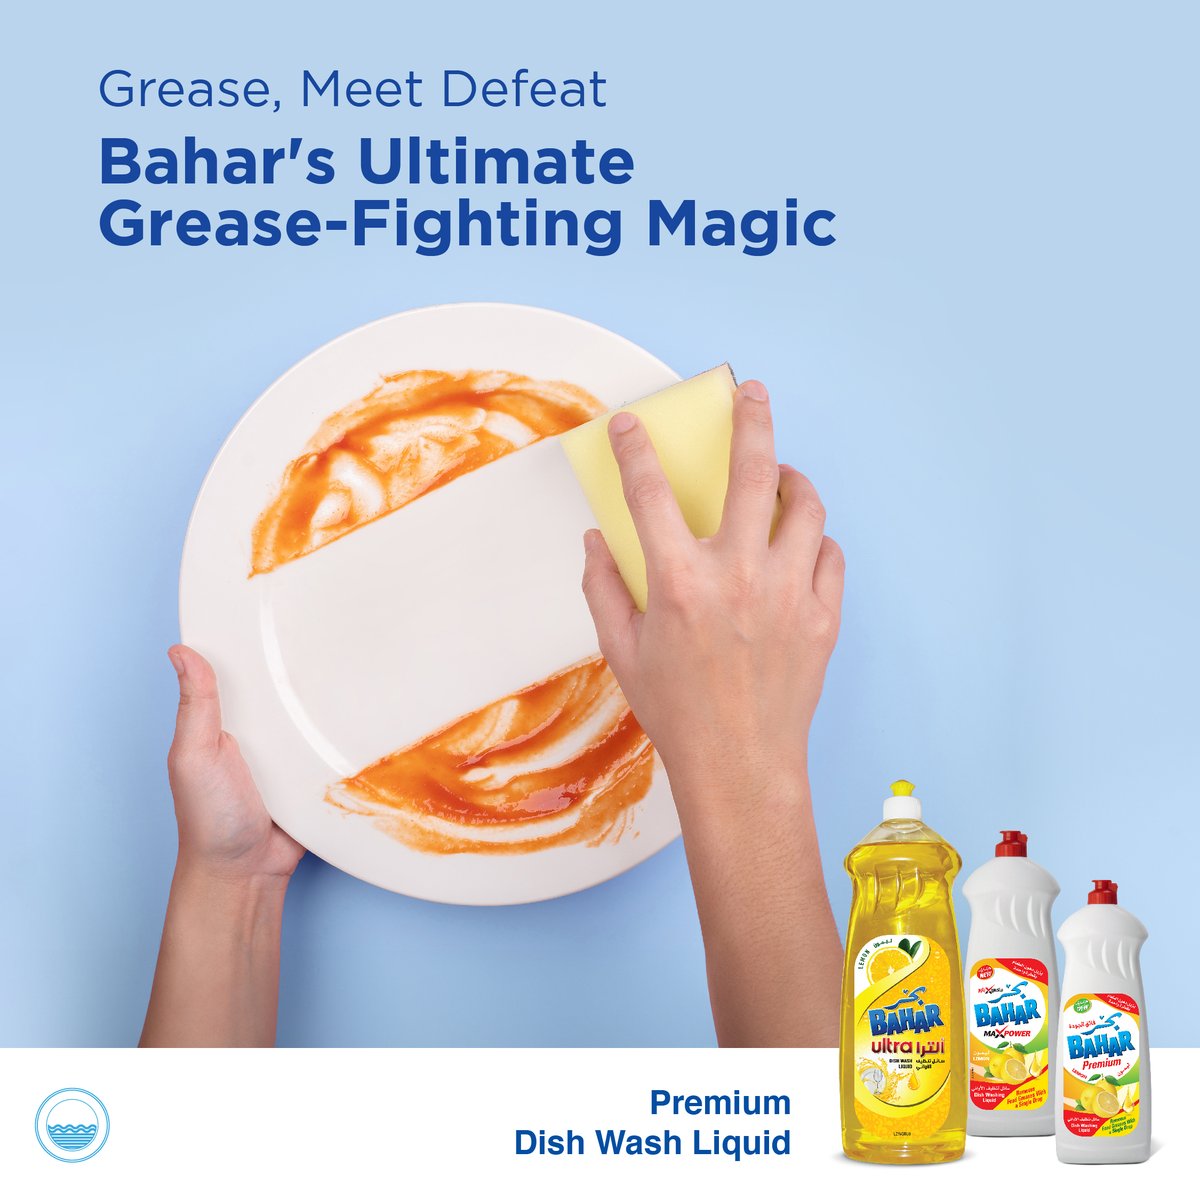 Remove tough grease with a swipe of Bahar's dishwashing liquid – your secret weapon for sparkling clean dishes! ✨🍽️ 

#CleanMagic #BaharDishwashLiquid #NDCBright #DishwashingDelight #SparklingClean #ShineInEverySwipe #DishwashingHero #DishCleaningMagic #EffortlessCleaning